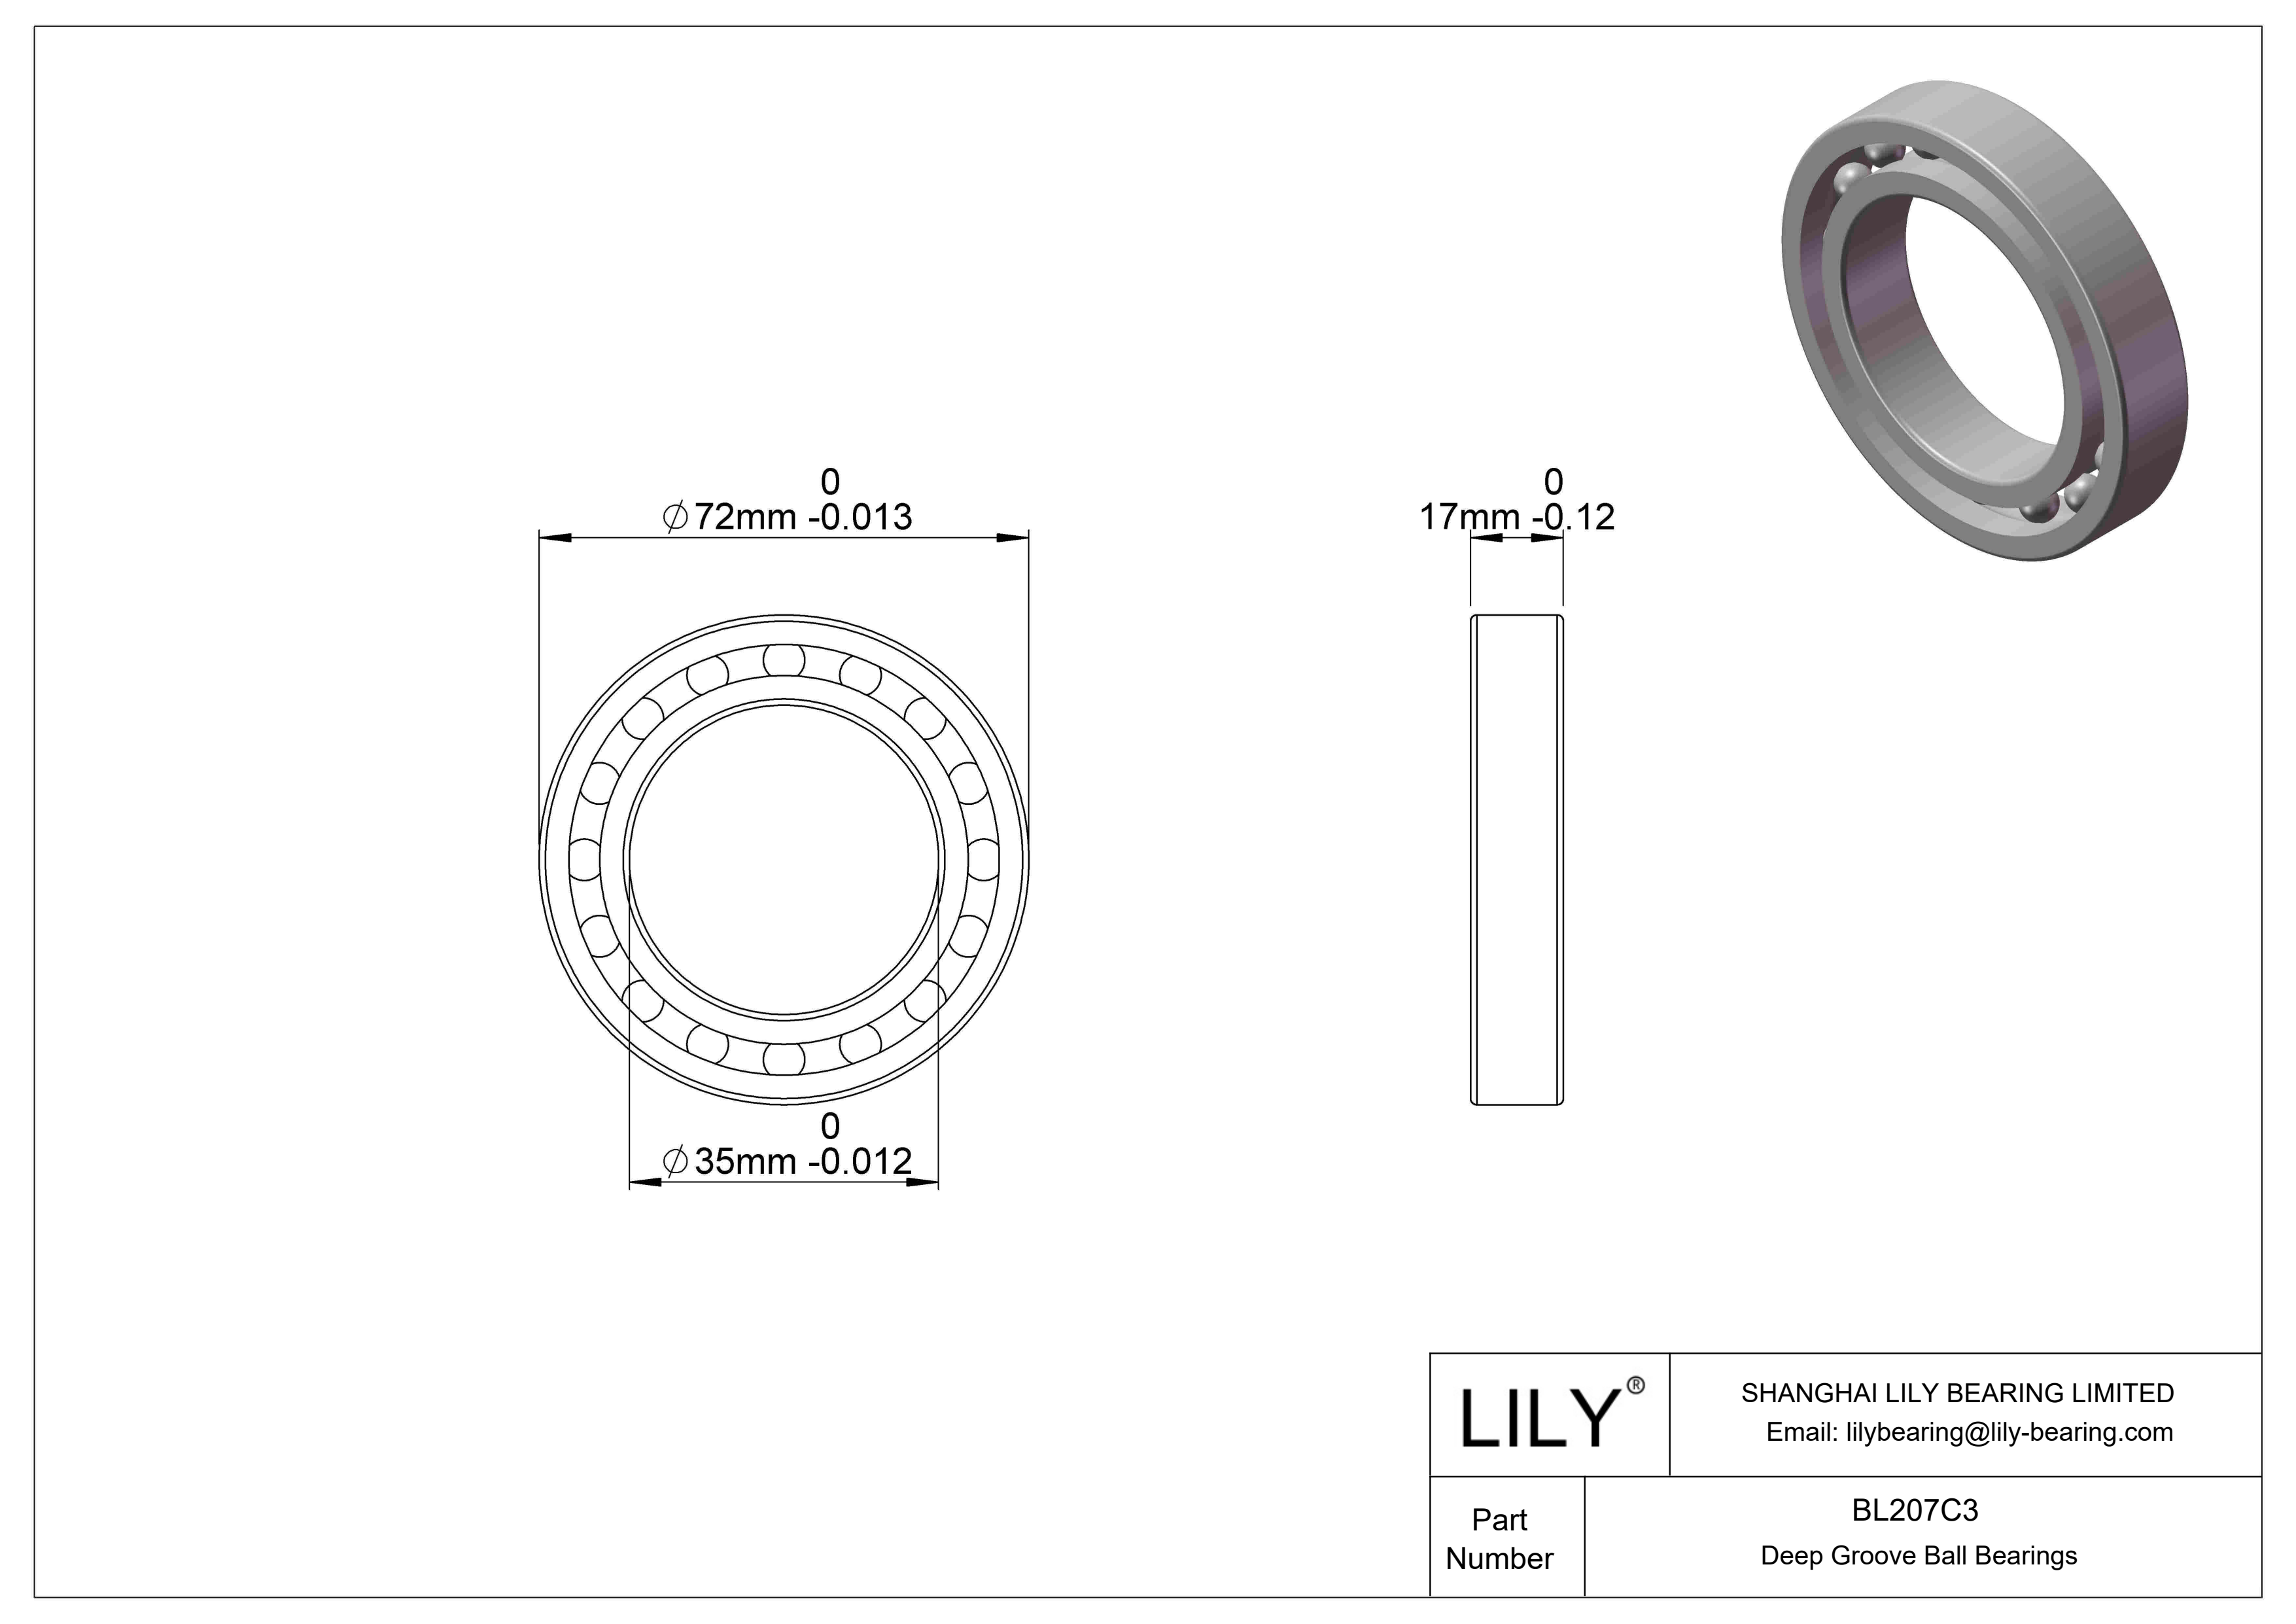 BL207C3 General Deep Groove Ball Bearing cad drawing